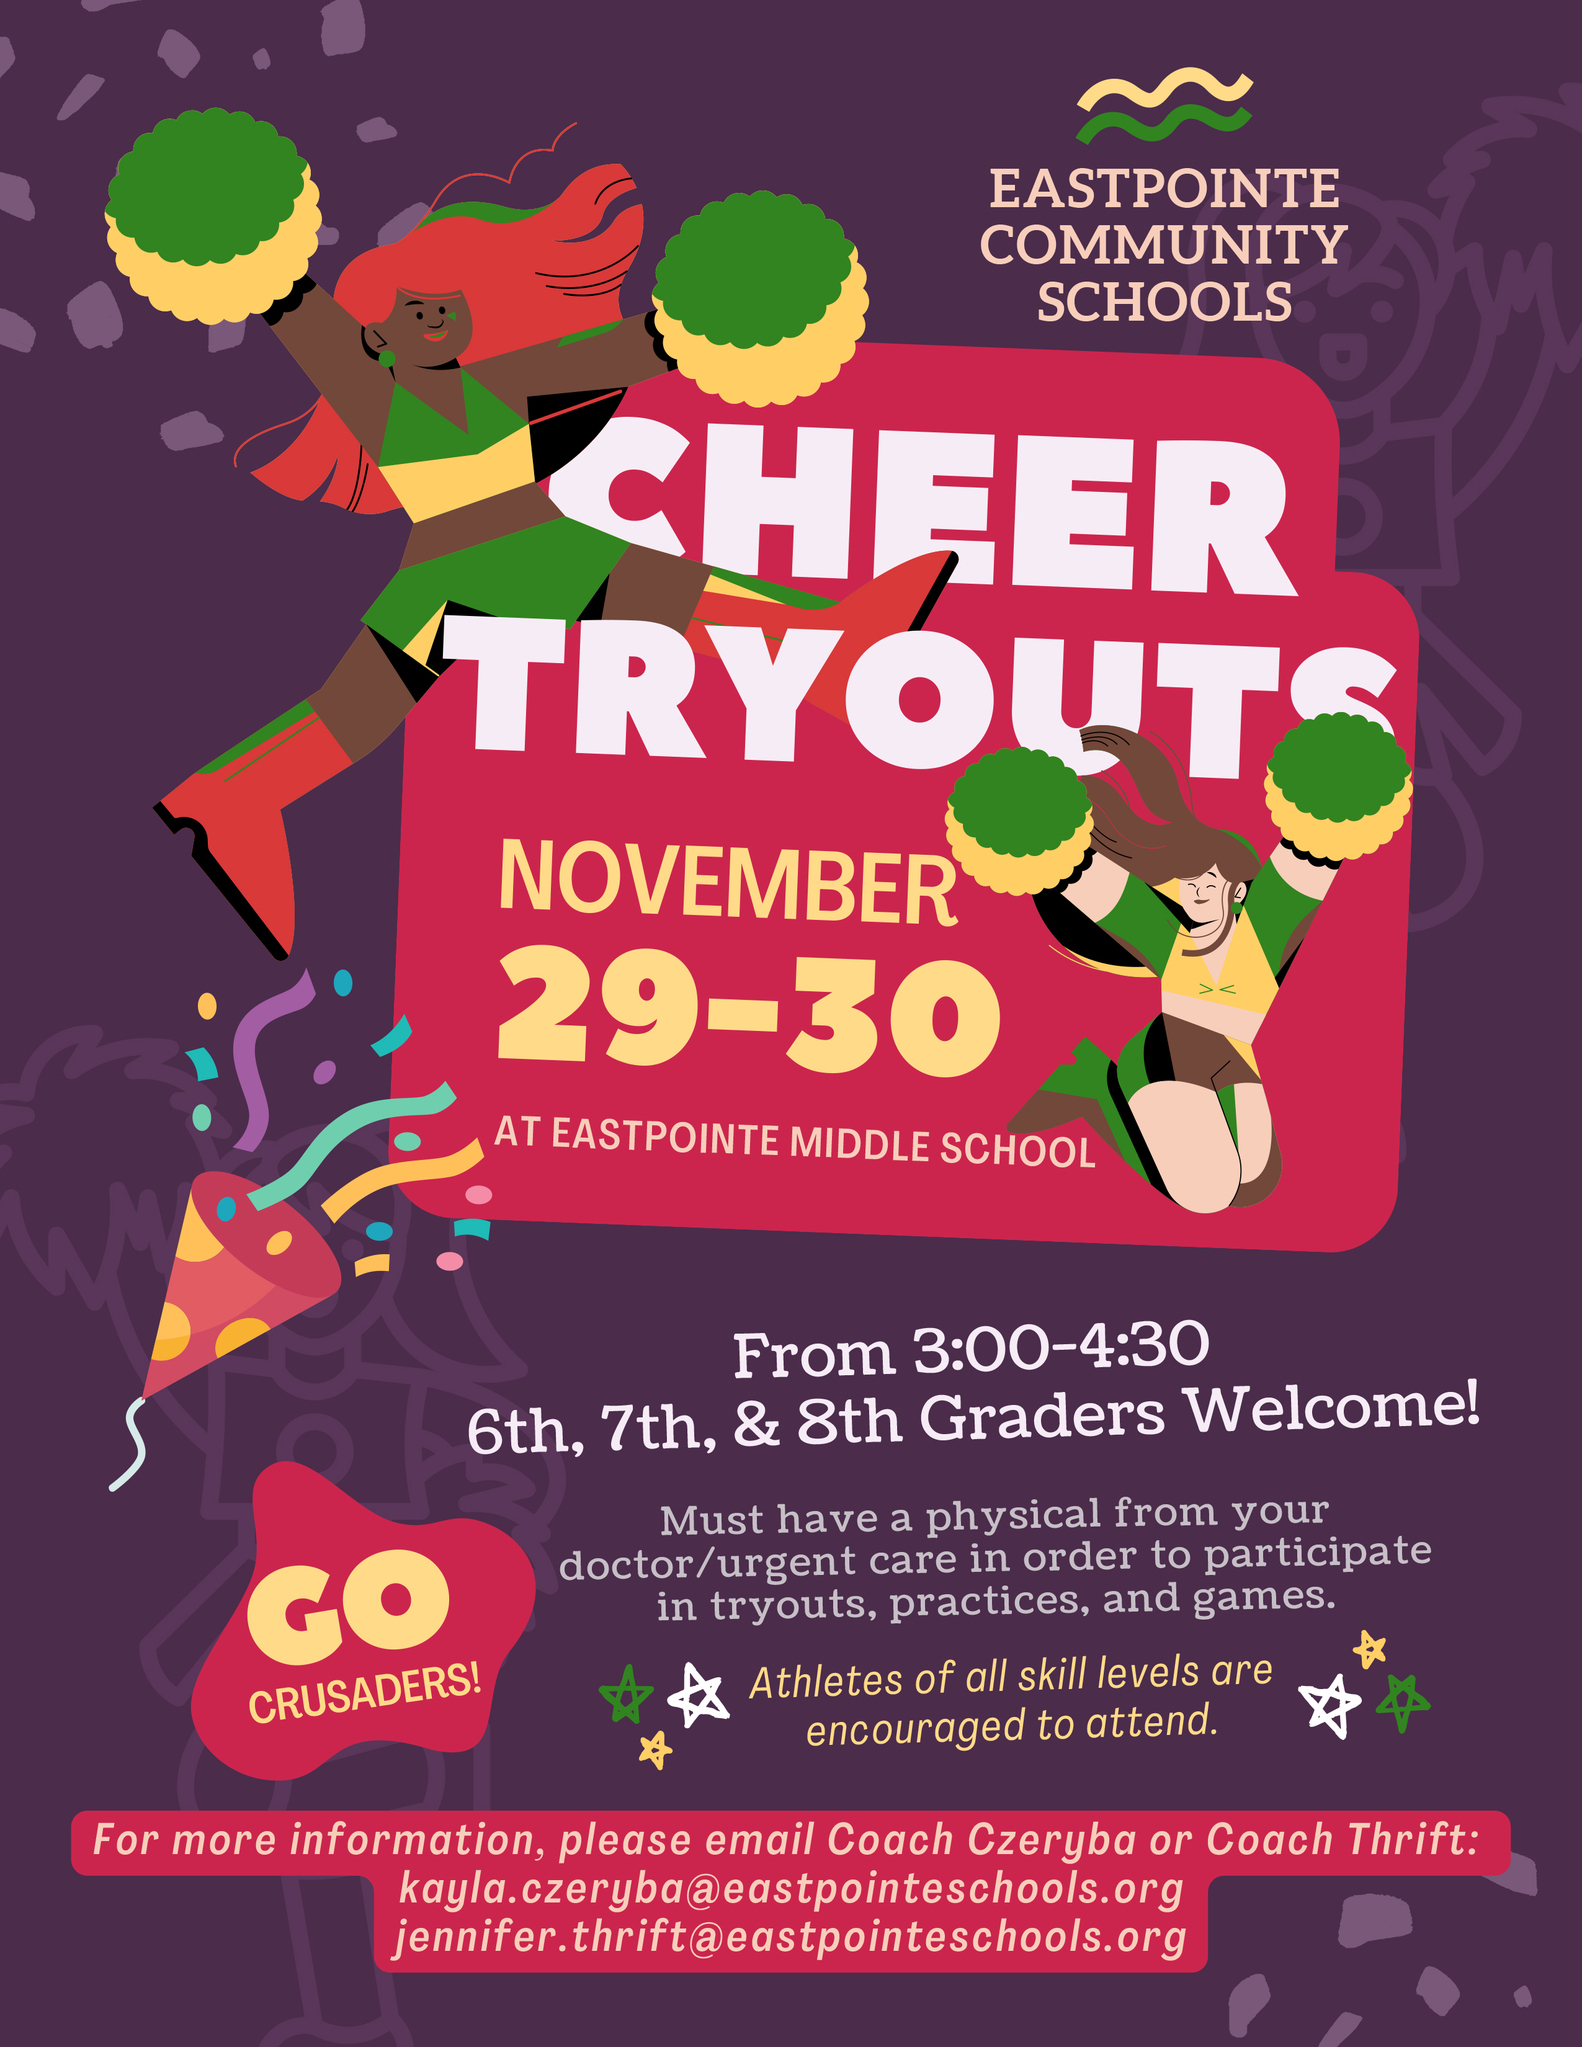 Middle School Cheer Tryouts Flier November 29-30 at Eastpointe Middle School